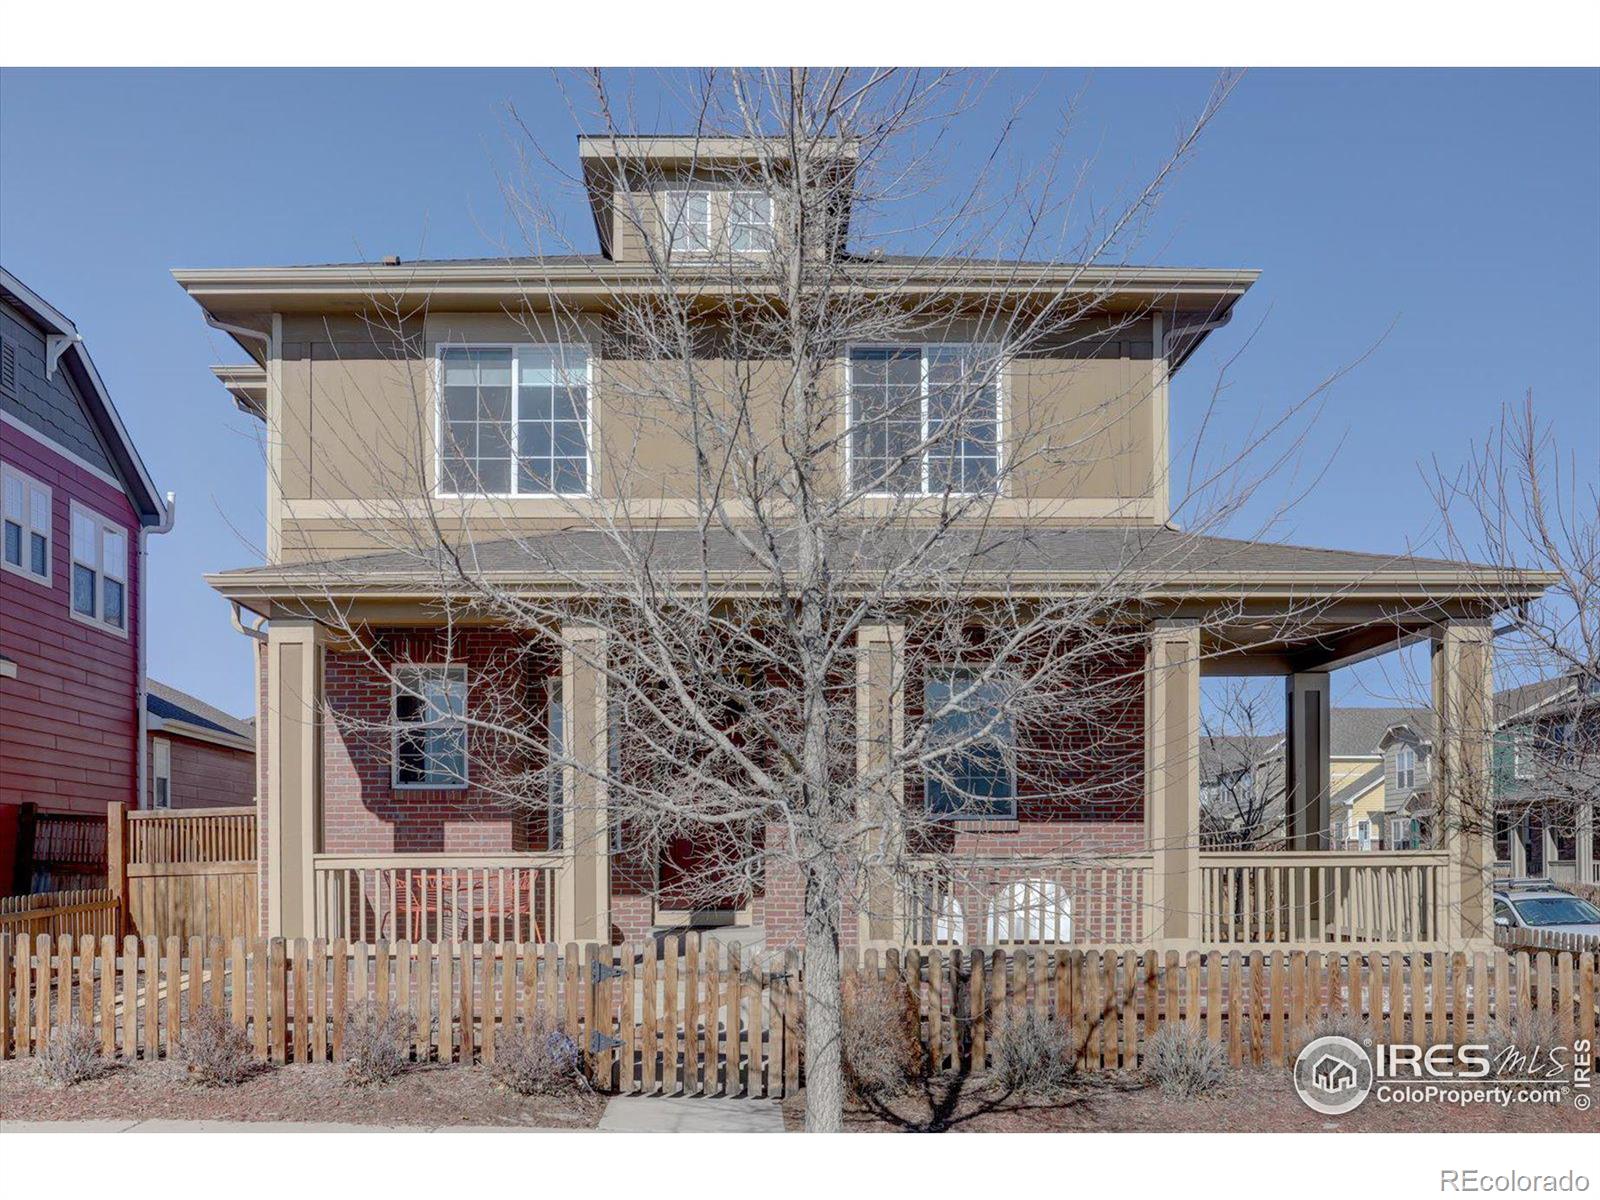 Report Image for 3697 W 118th Place,Westminster, Colorado